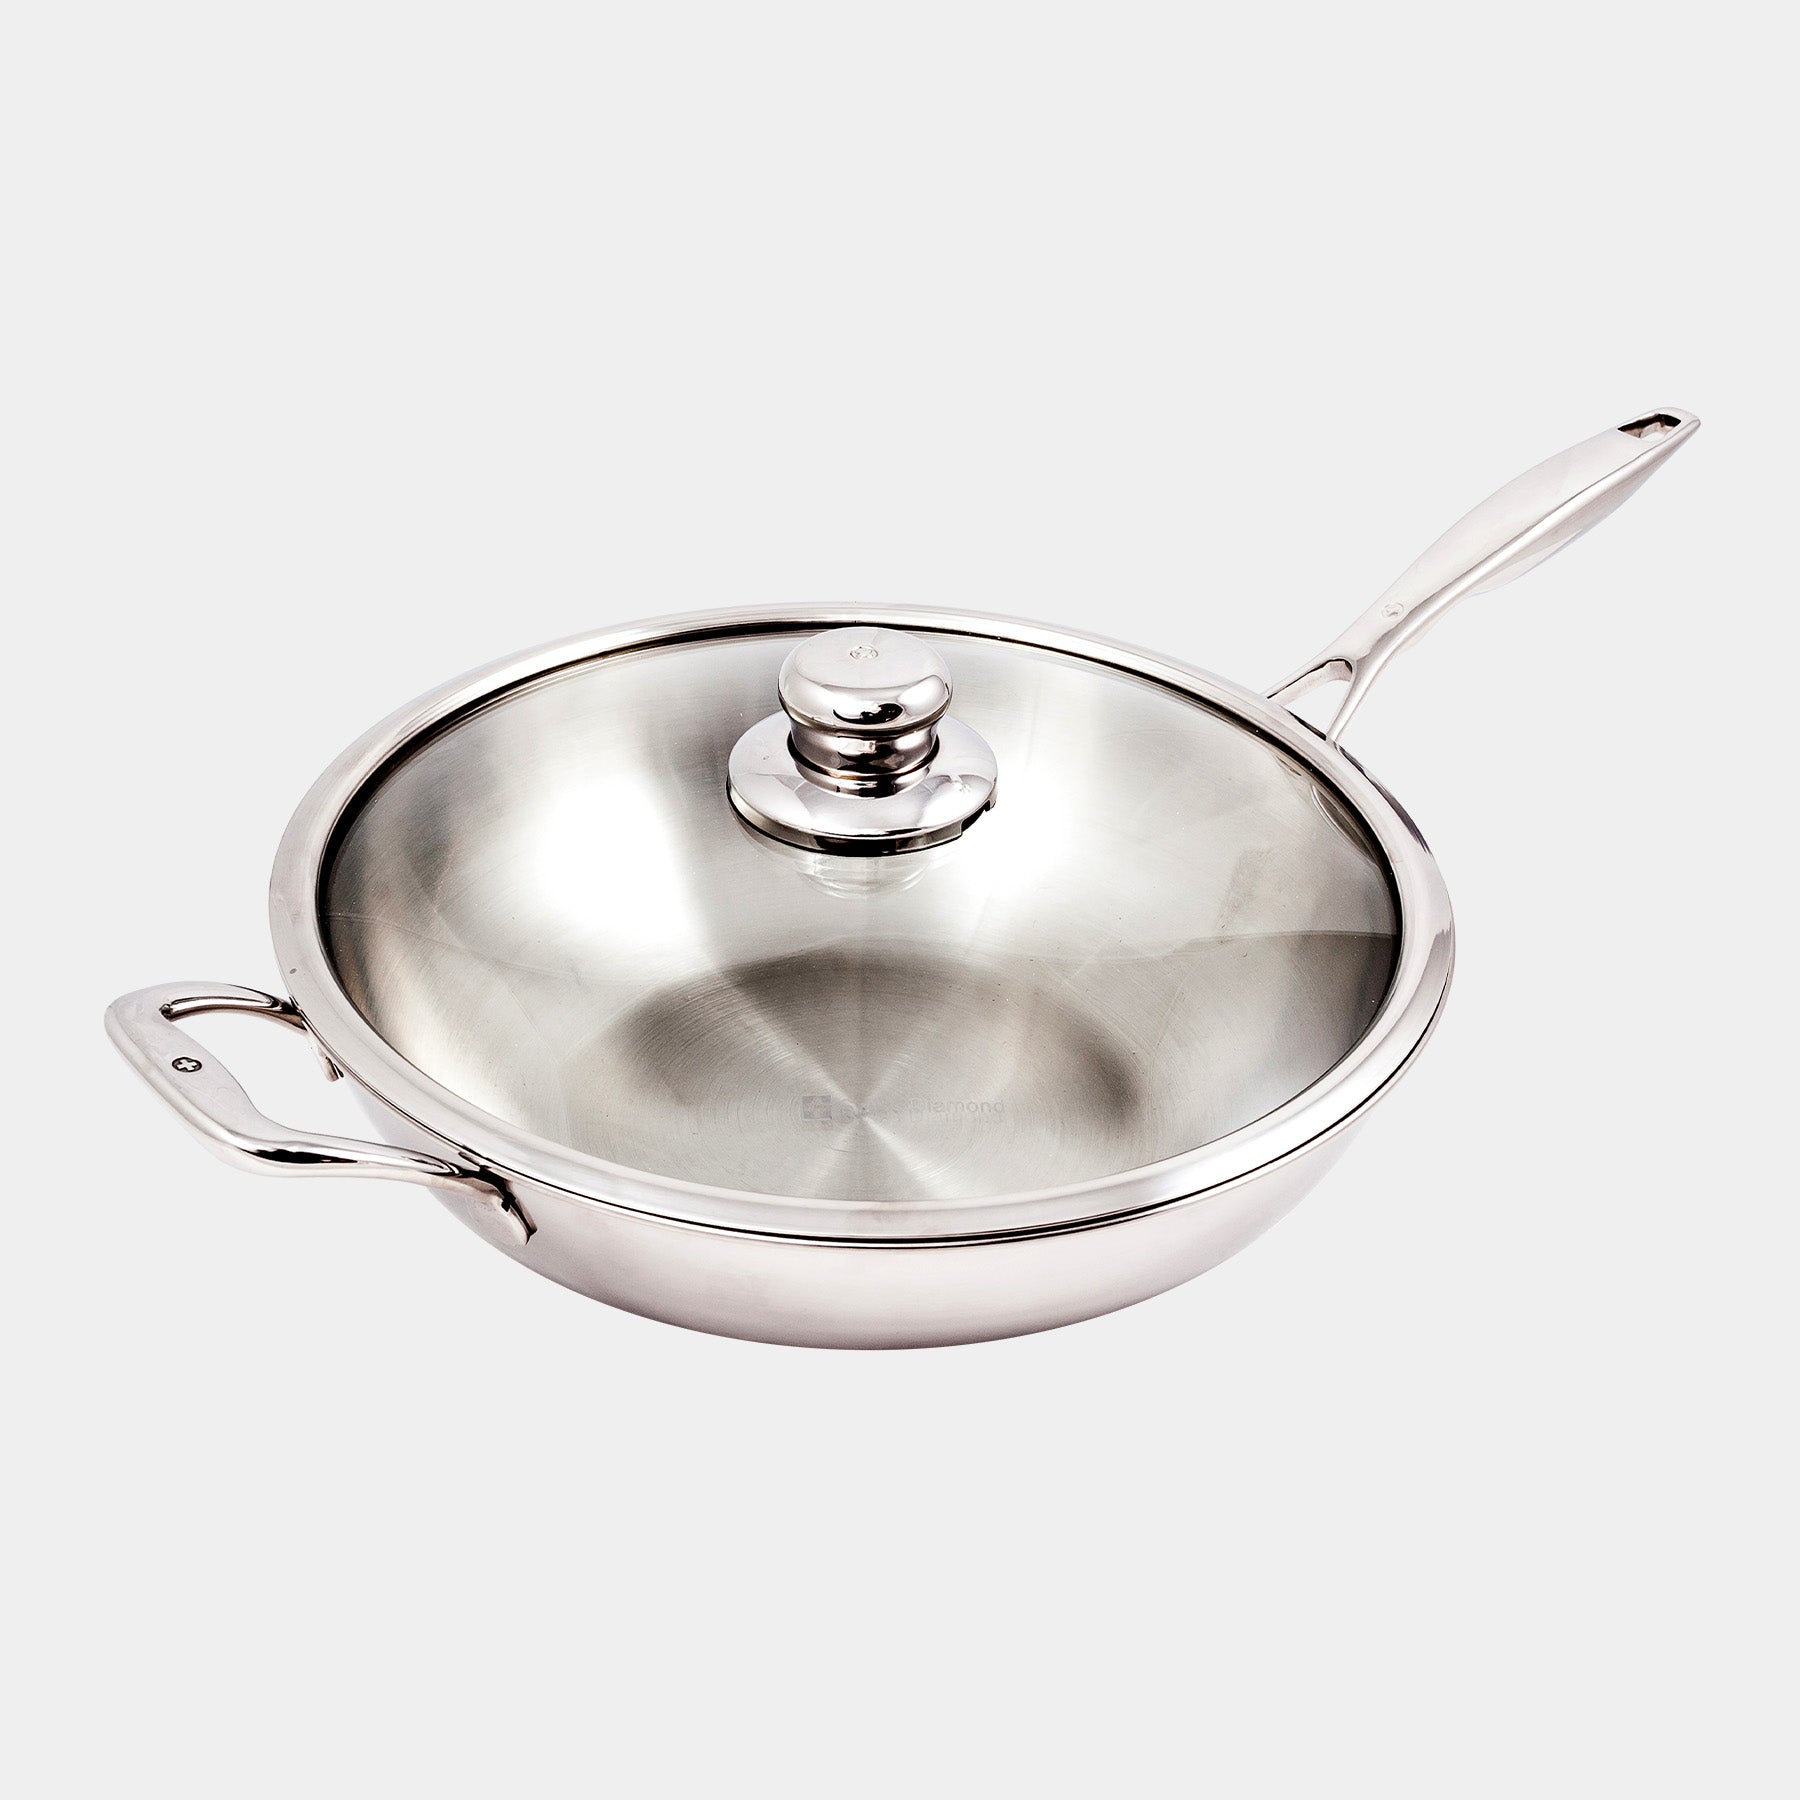 Premium Clad 12.5" Wok with Glass Lid - Induction